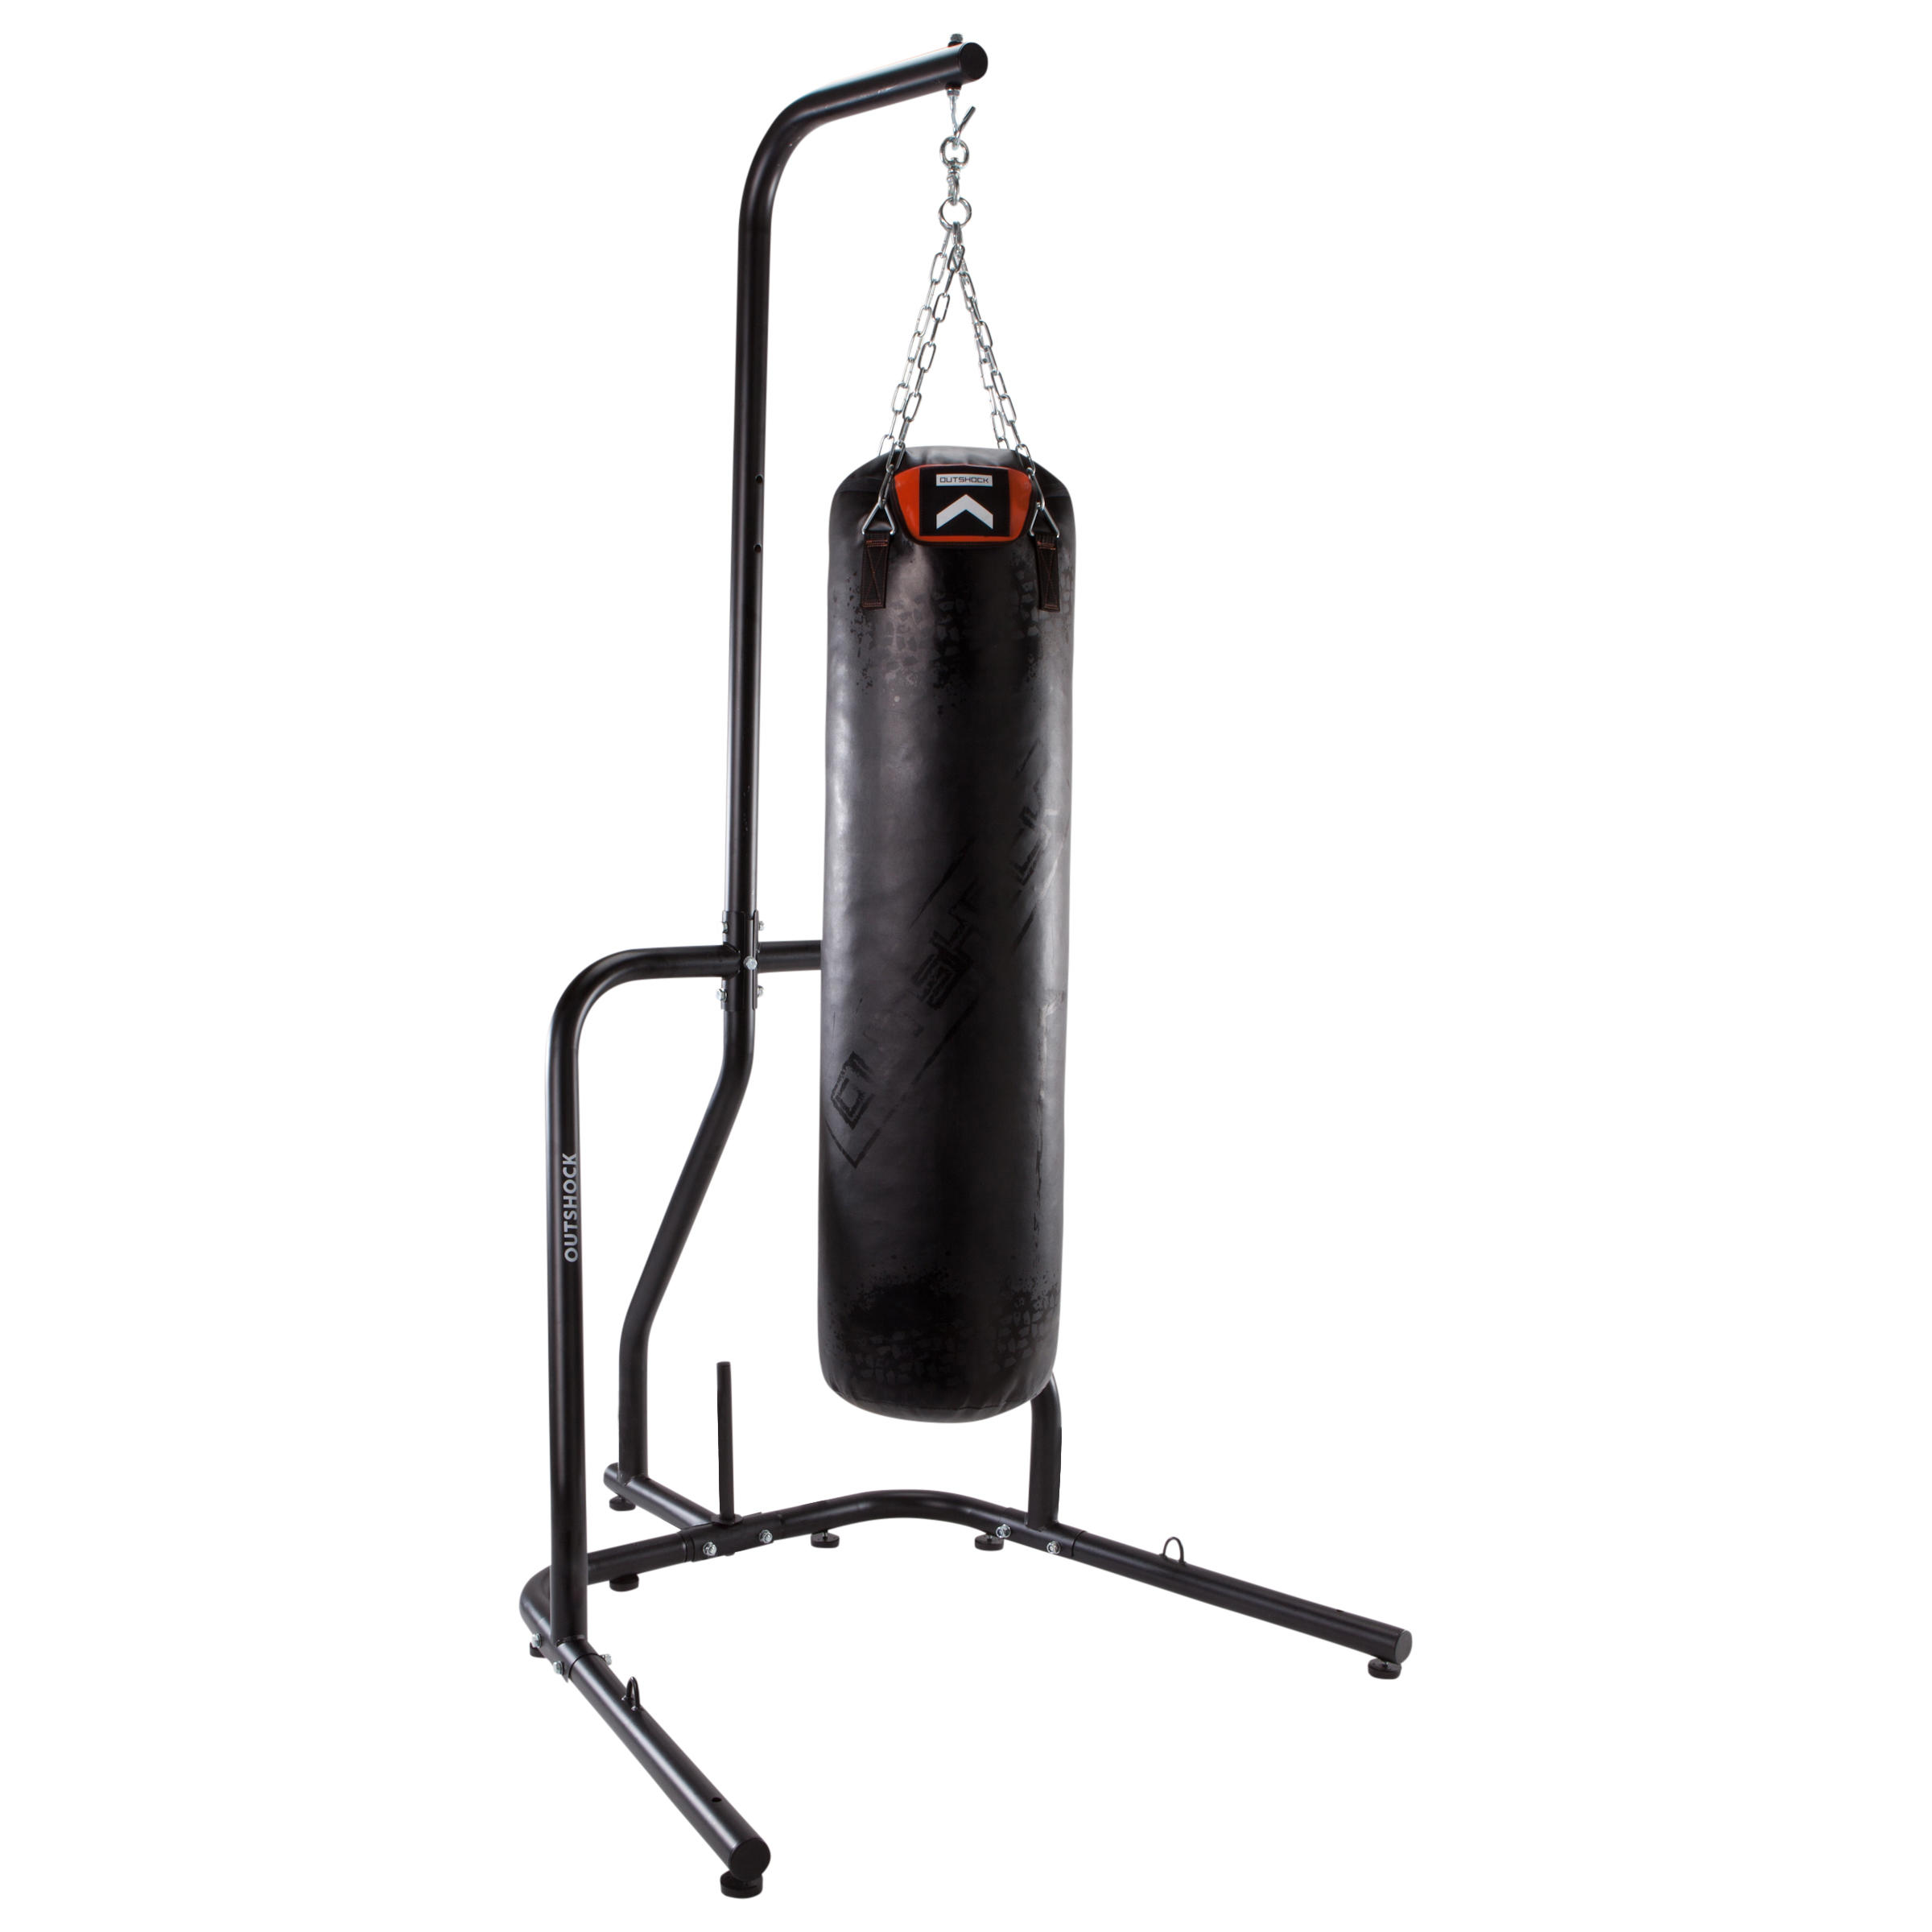 Buy XPEED Free Standing Bag for Kickboxing 72inches Black Hard Punching MMA  Training with Glove Online at Low Prices in India  Amazonin